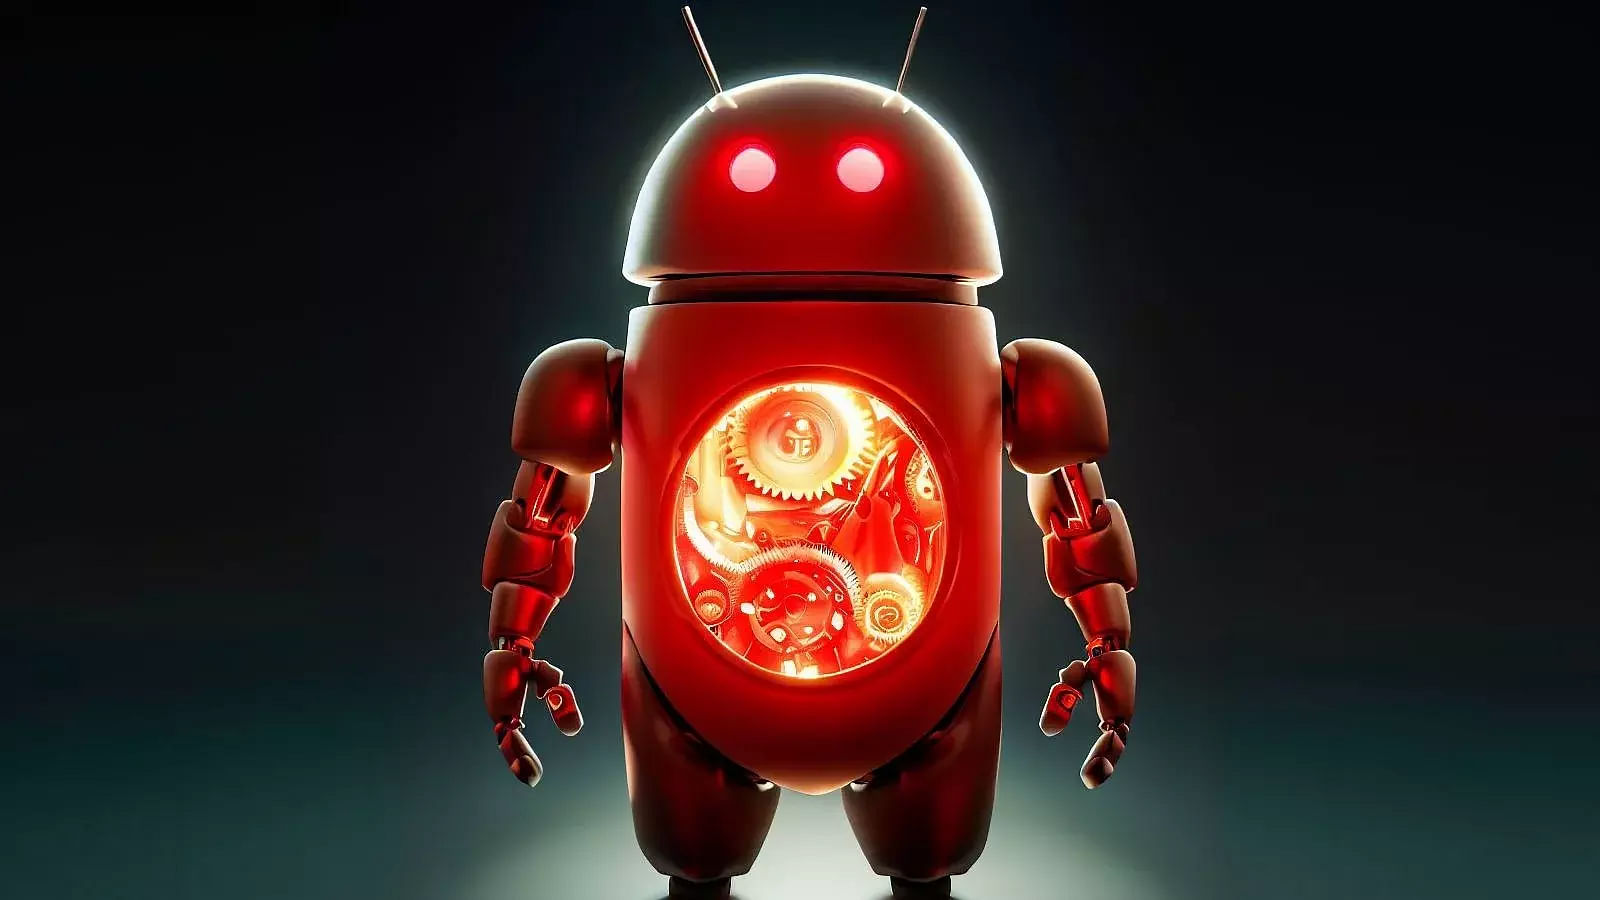 New Android malware infects 330K devices via malicious apps on Google Play